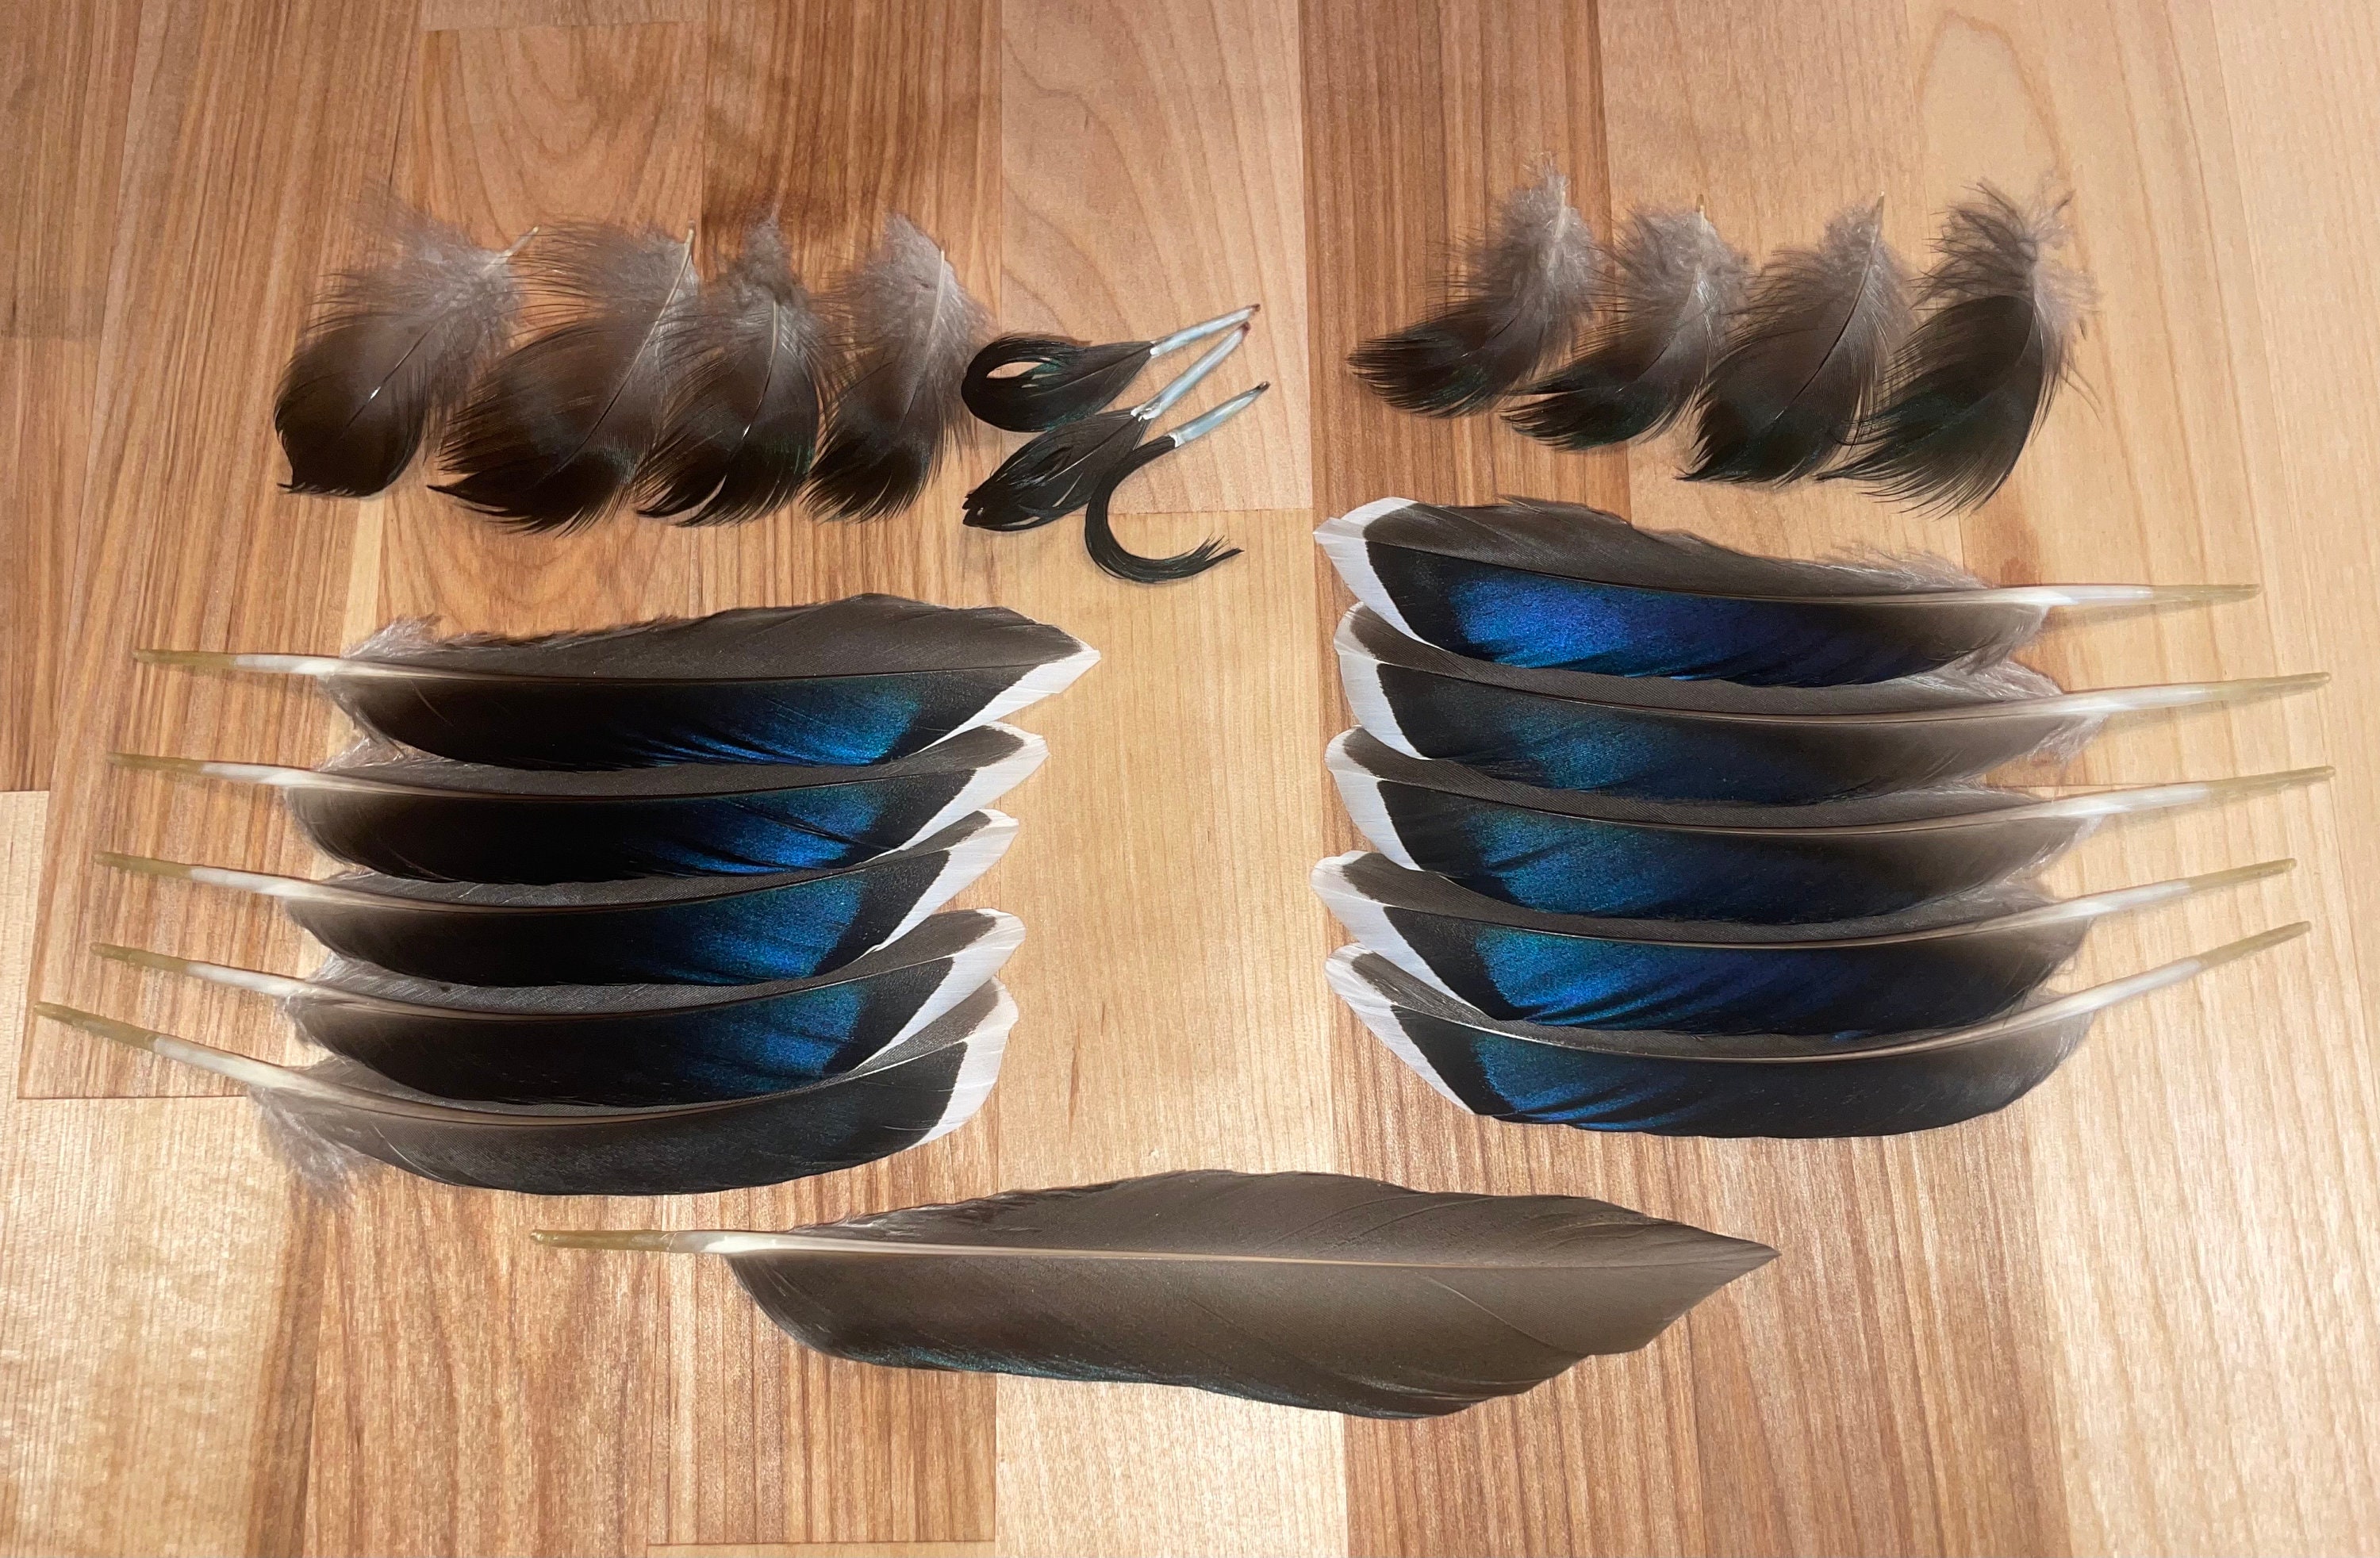 Feathers, Pheasant Feathers, Guinea Feathers, Duck Feathers, Goose